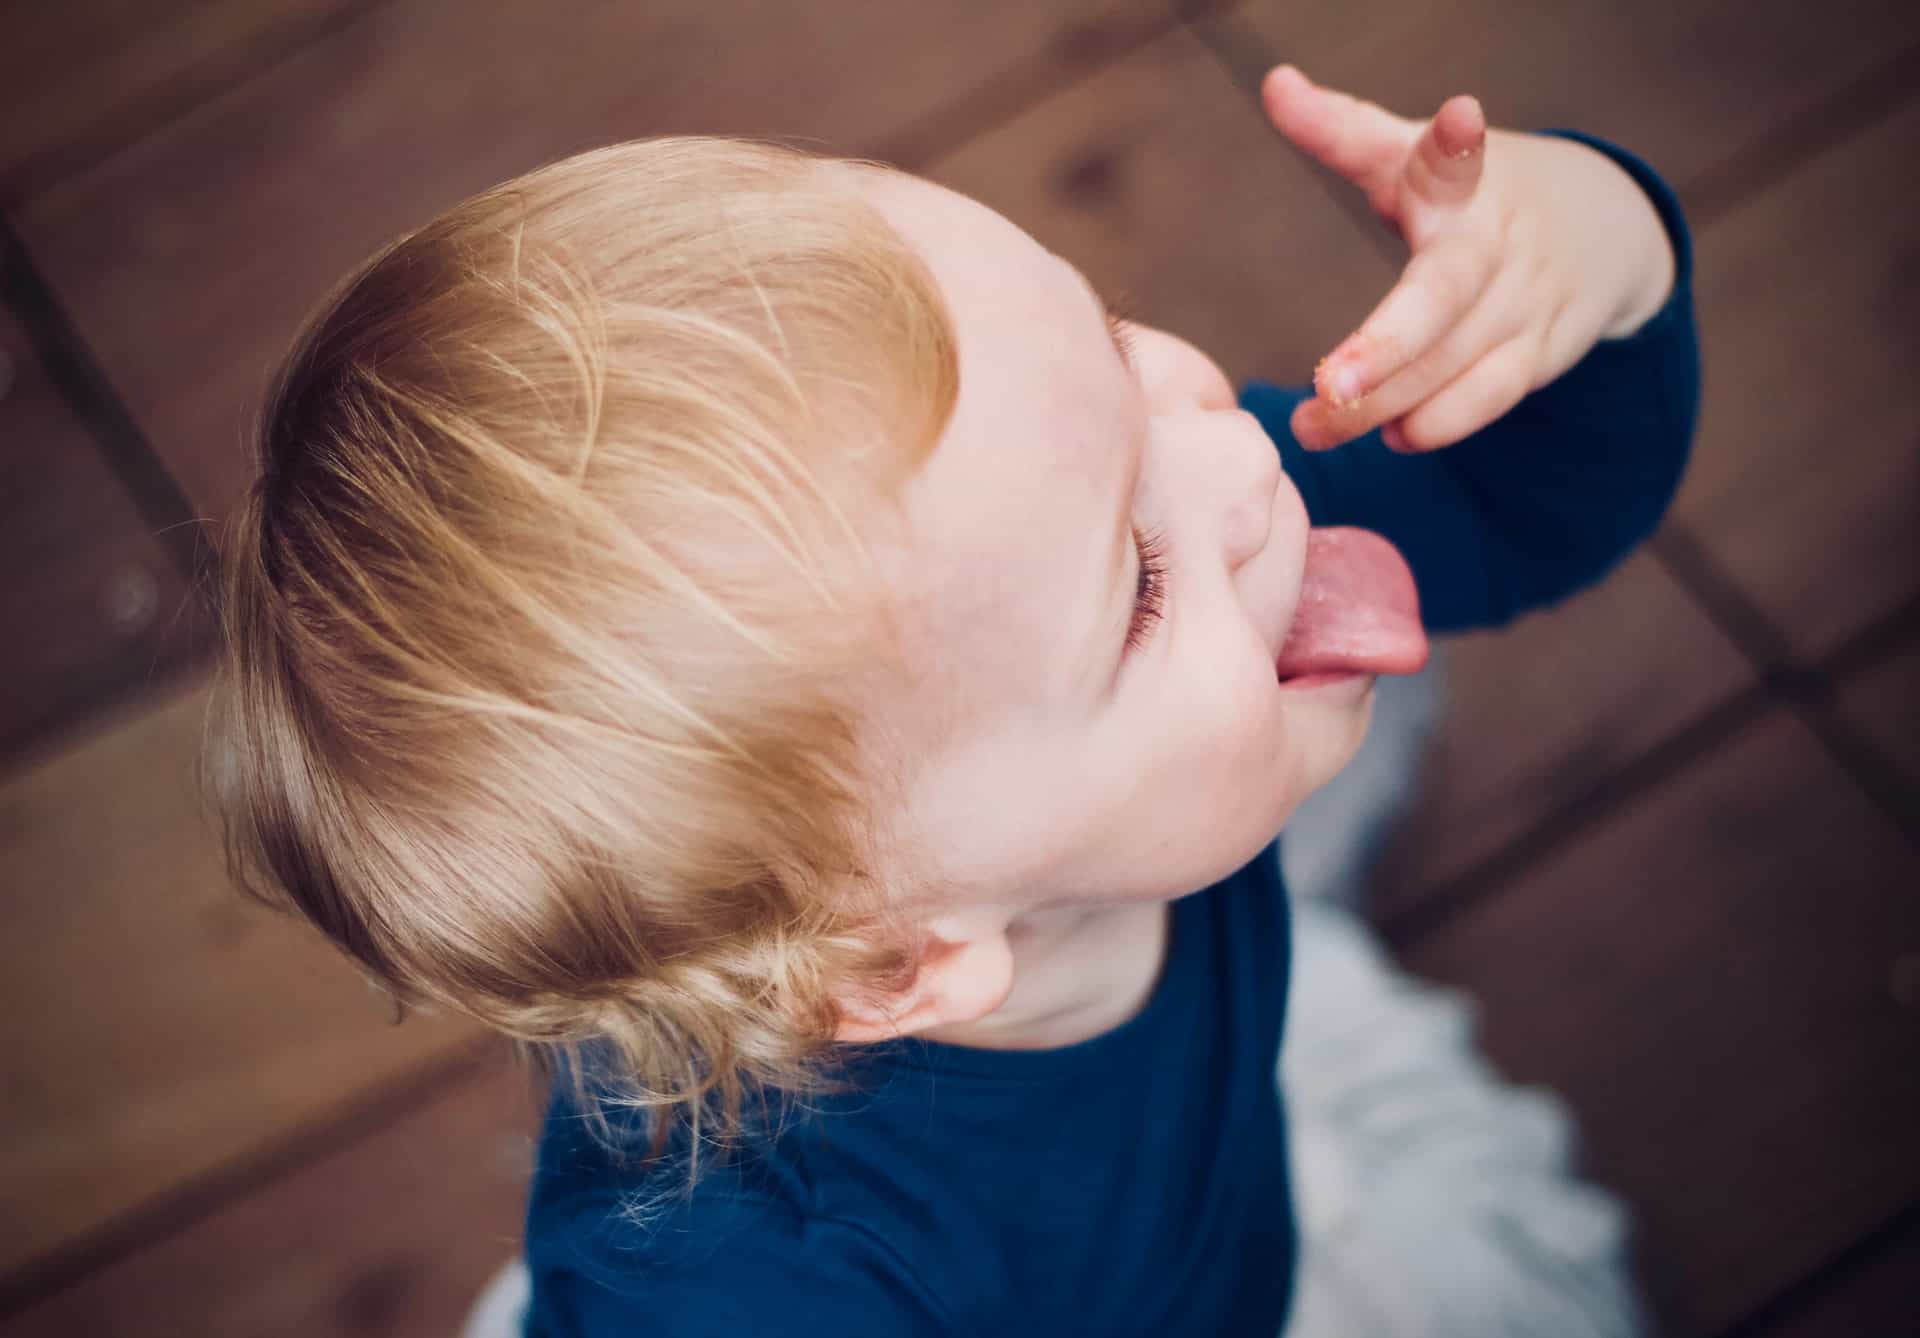 A toddler sticking his tongue out